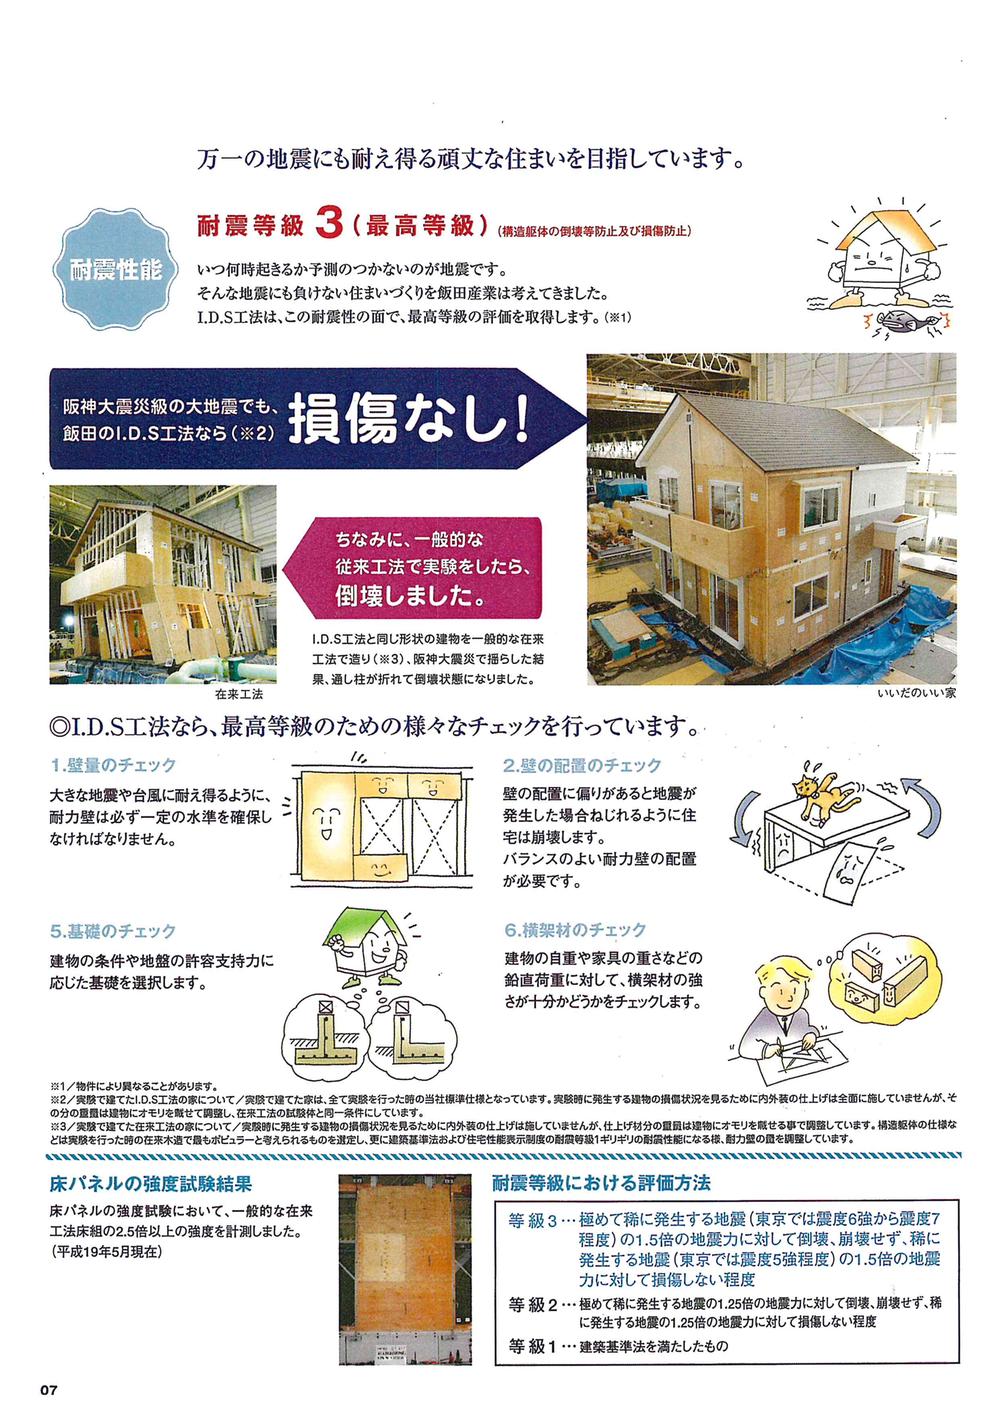 Construction ・ Construction method ・ specification. Seismic grade, Highest grade acquisition. No melancholy, if equipped